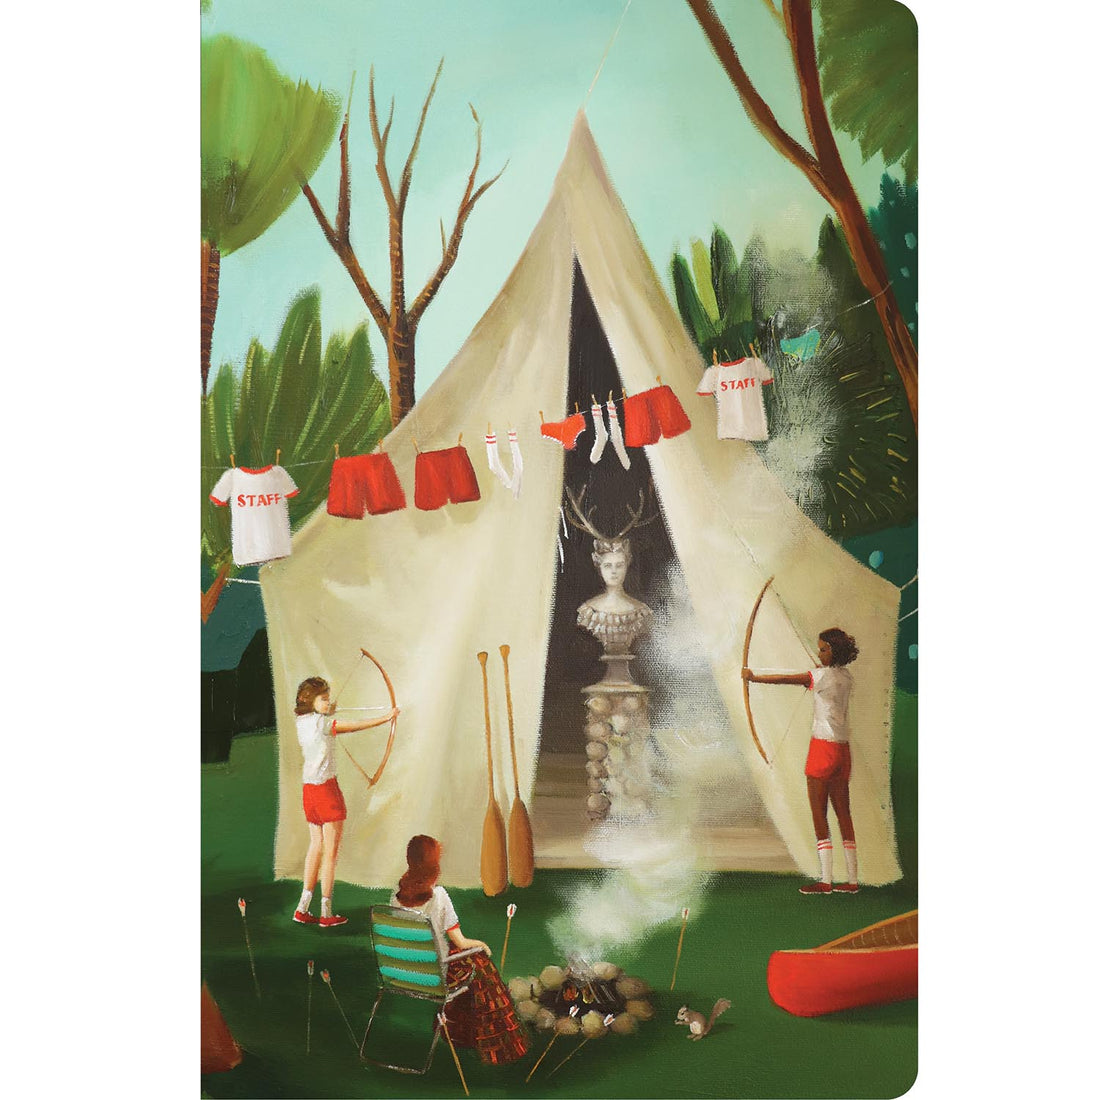 The front cover of the Summer Camp Notebook features a painterly illustration of a camping scene, featuring a canvas tent with a vintage sculpture inside, clothes hanging on a clothesline, a campfire, a canoe and paddles, and two children playing with archery equipment in a lush forest. 